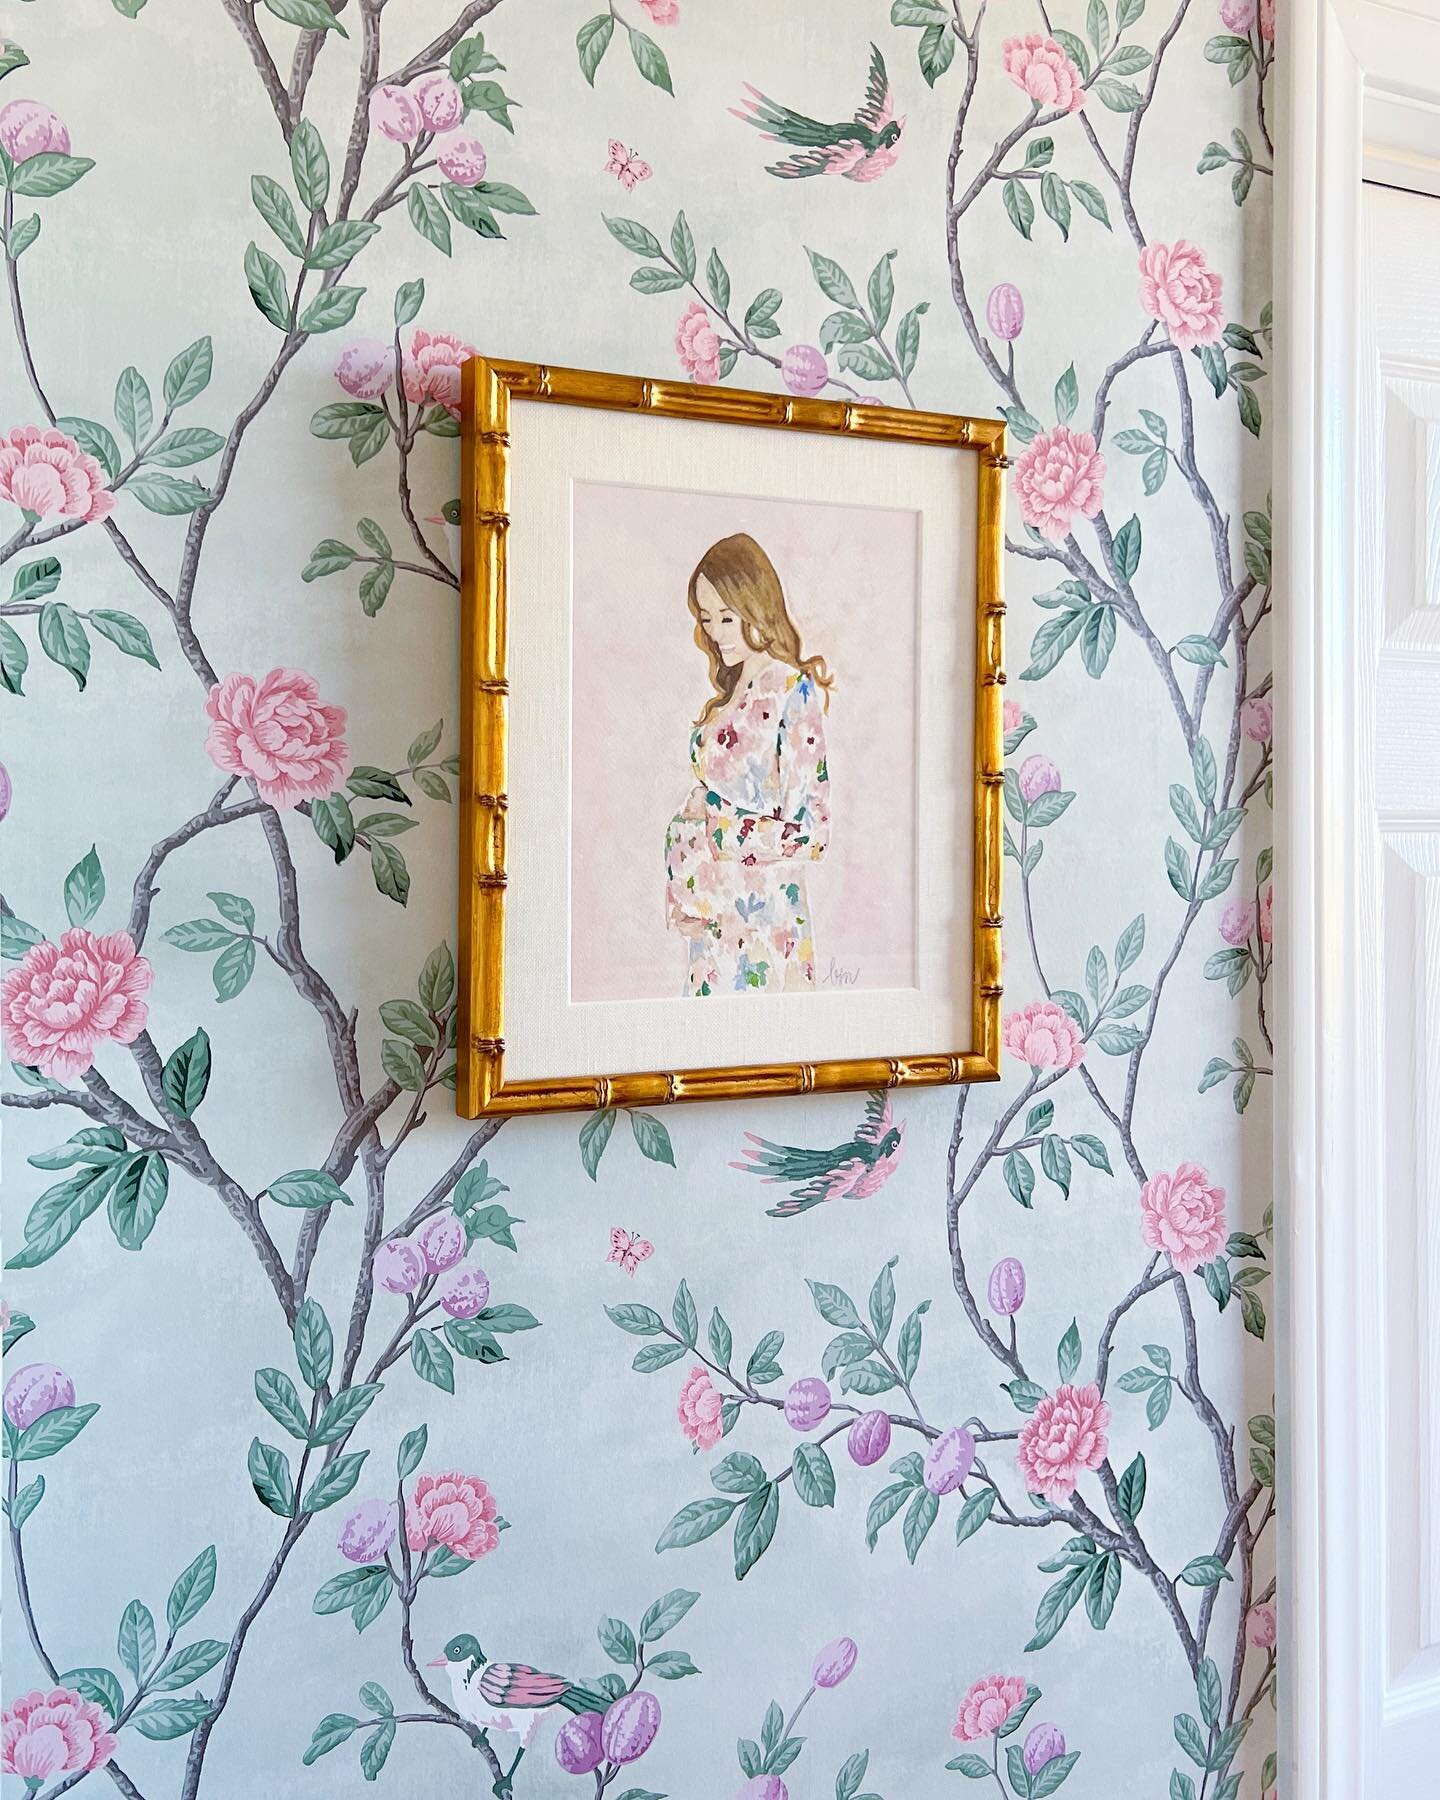 Personal touches can transform a space from ordinary to extraordinary 🤩 Incorporating family heirlooms or favorite accessories can infuse your personality into your home. 

For this nursery project, we commissioned this gorgeous watercolor painting 